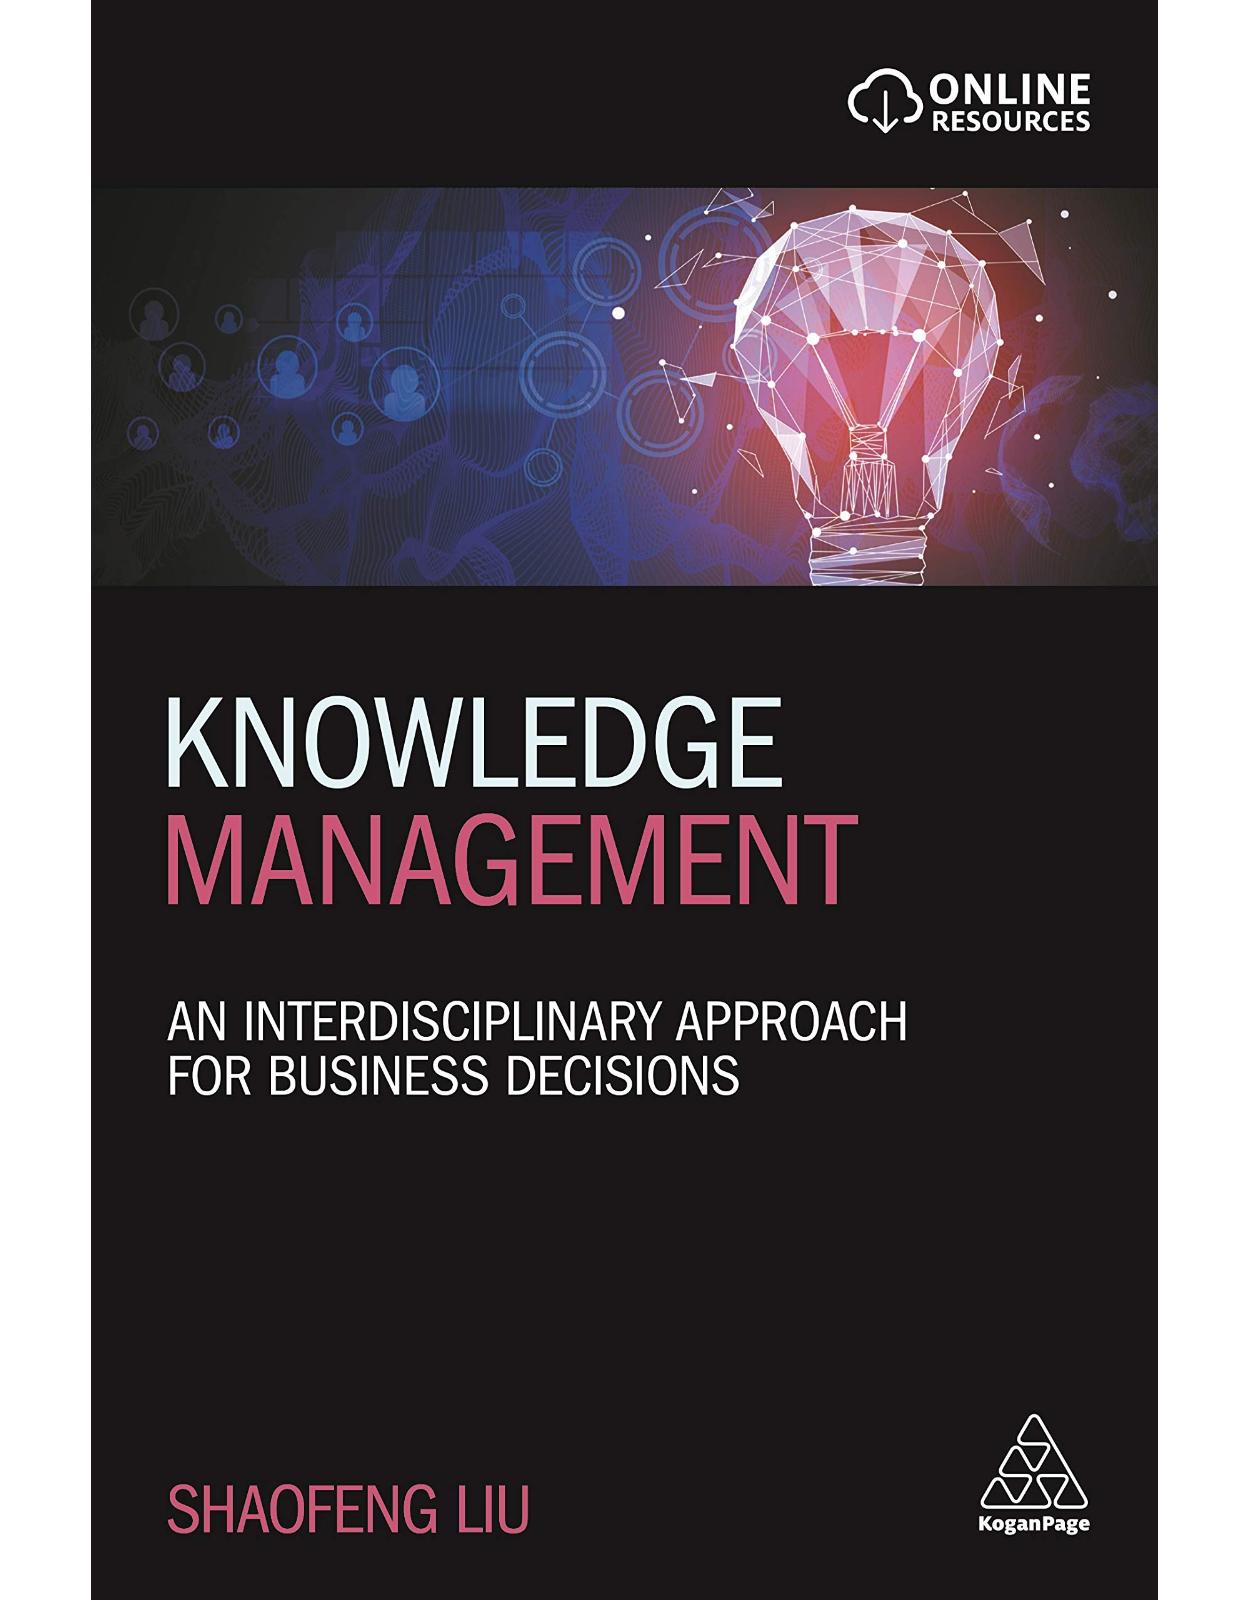 Knowledge Management: An Interdisciplinary Approach for Business Decisions